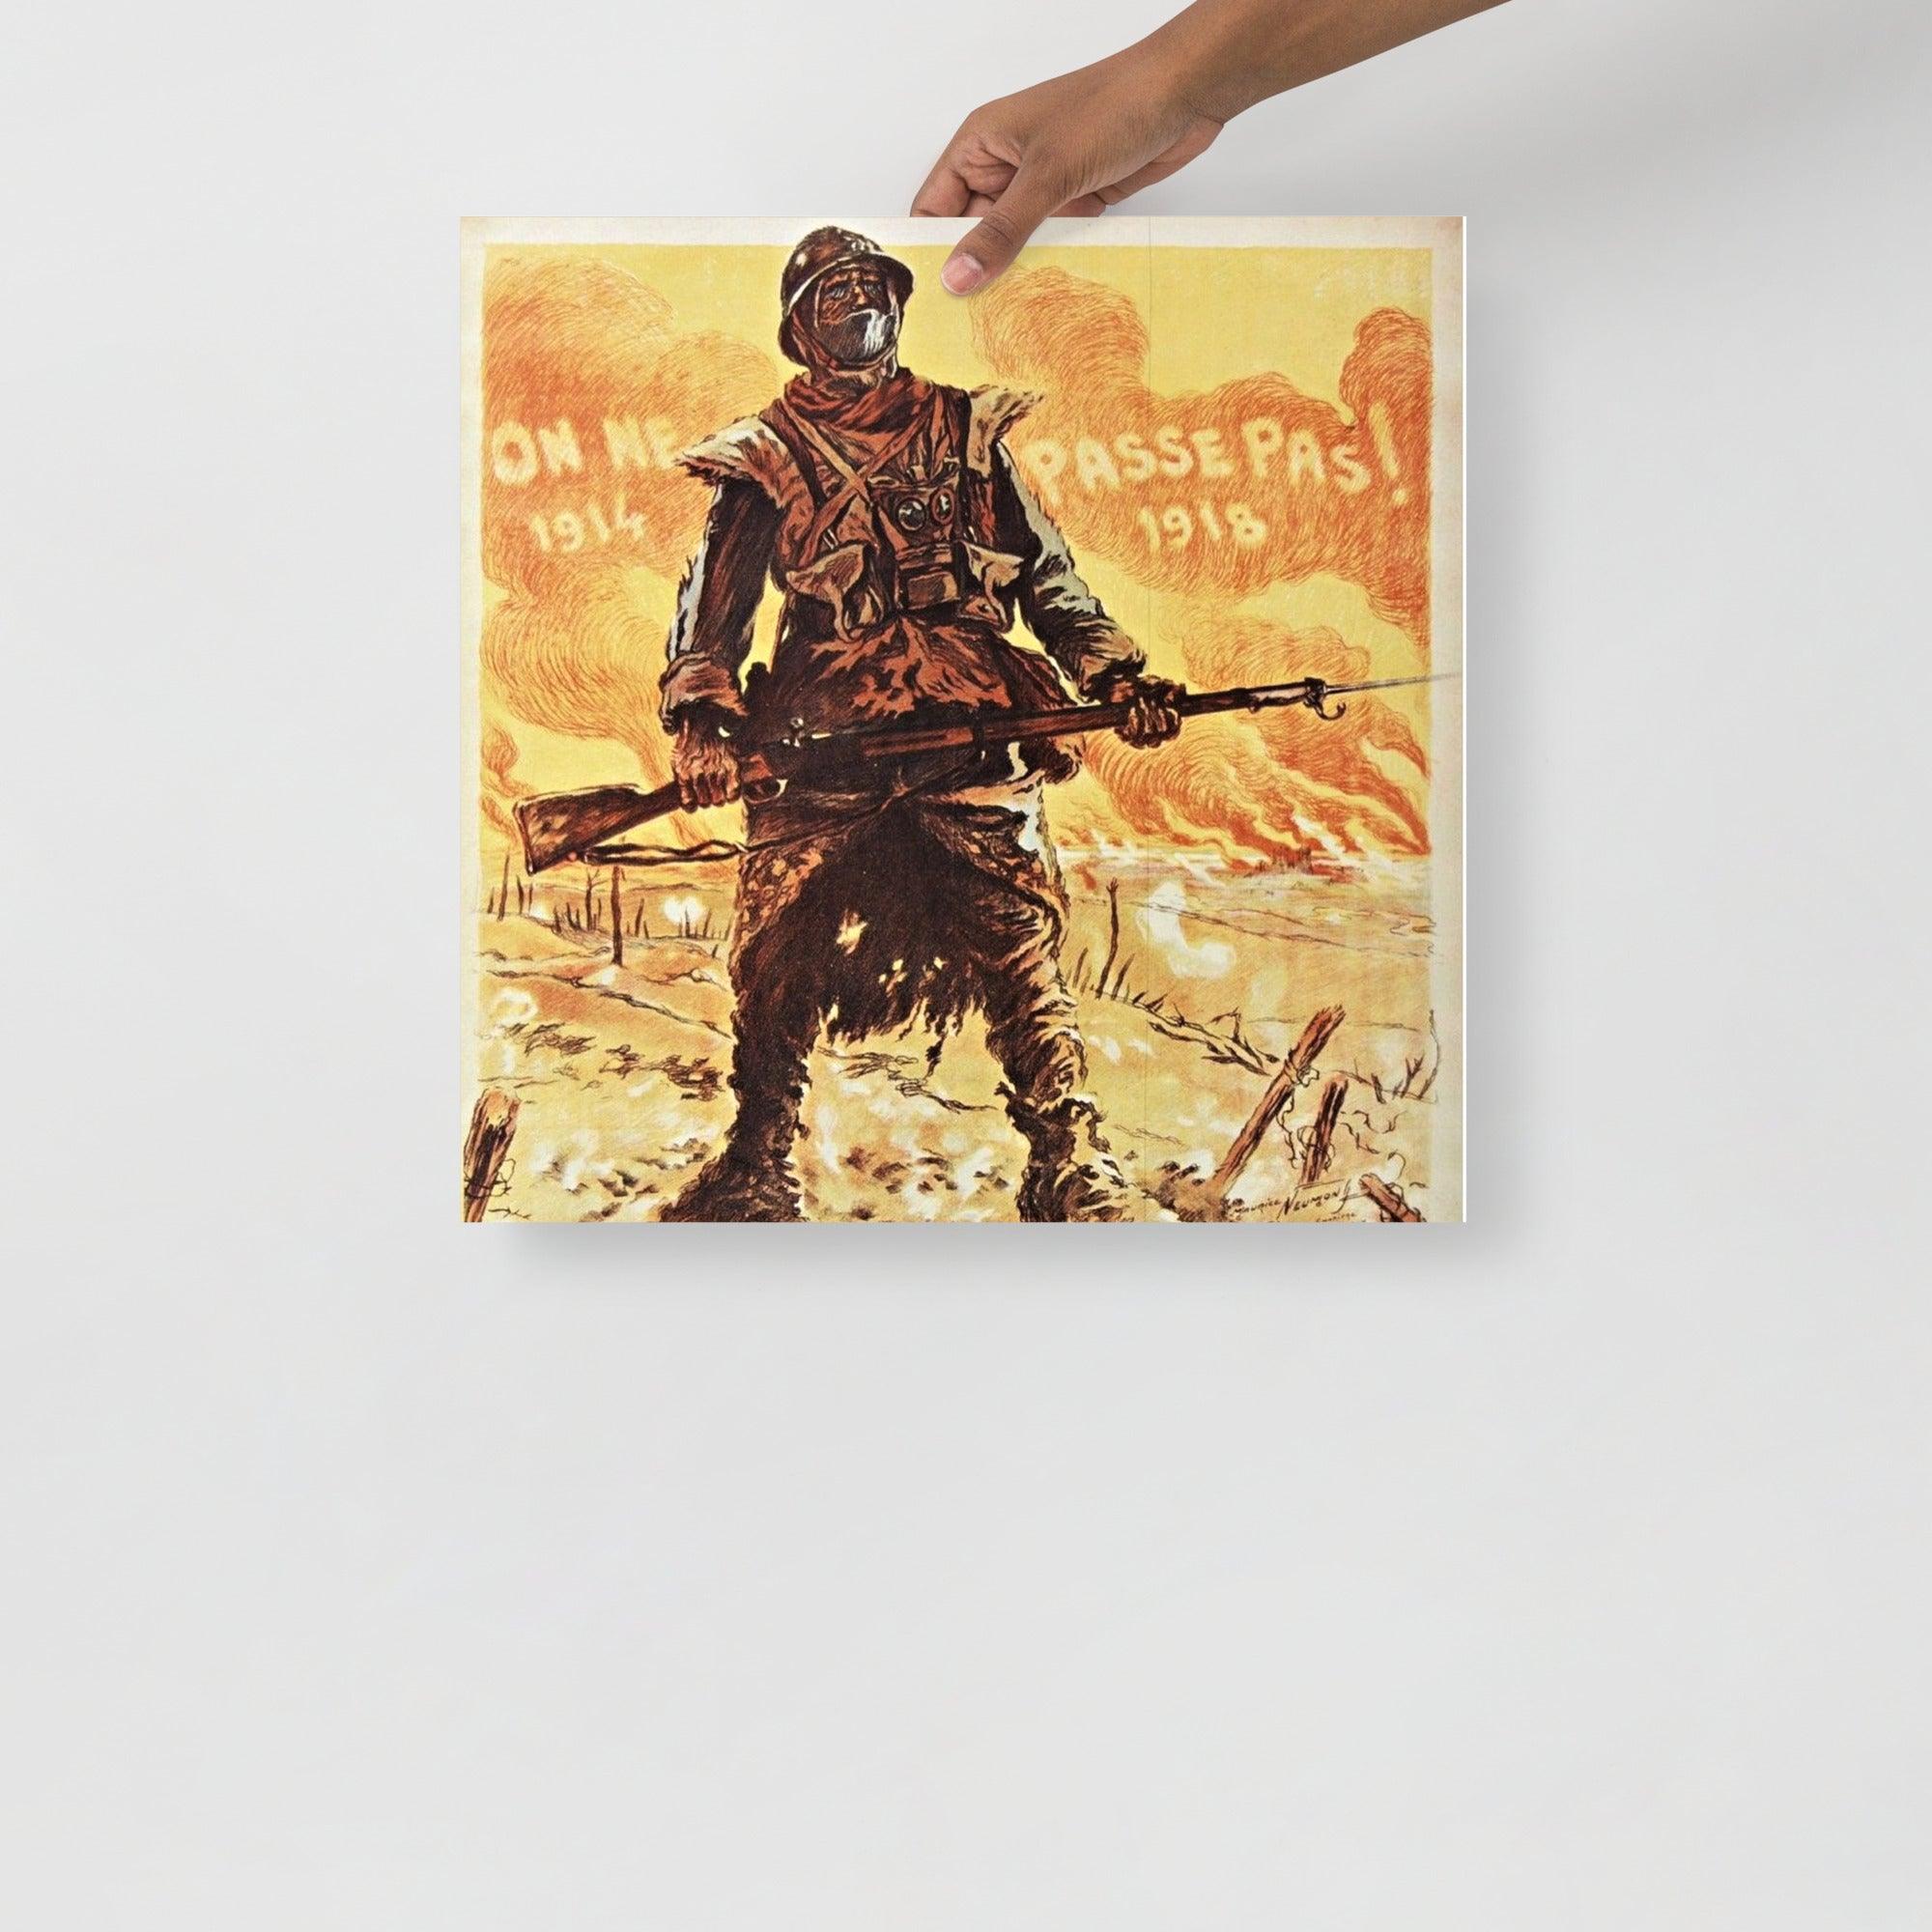 A They Shall Not Pass (On Ne Passe Pas) By Maurice Neumont poster on a plain backdrop in size 18x18”.